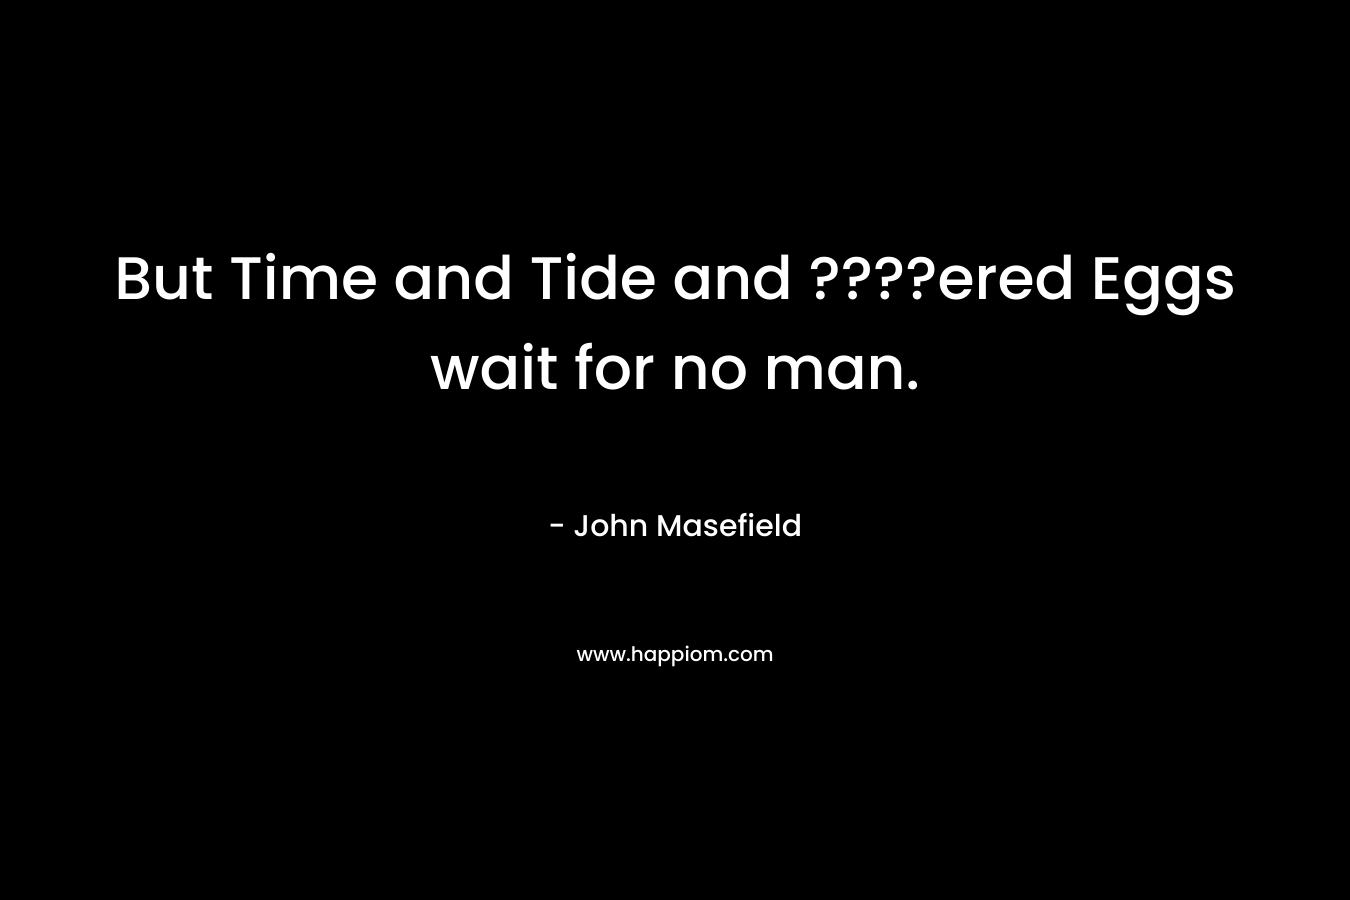 But Time and Tide and ????ered Eggs wait for no man.